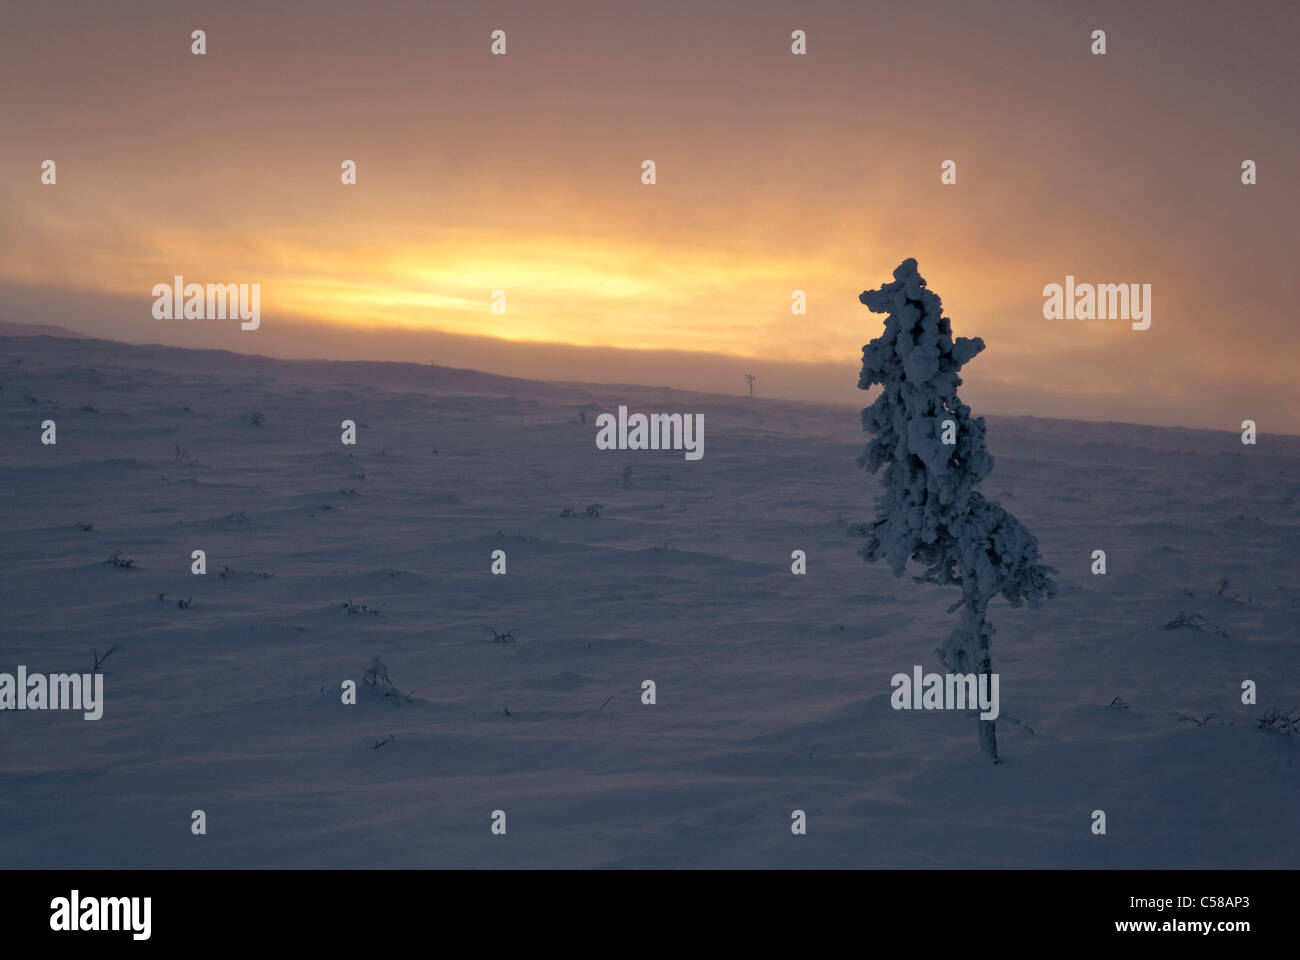 Arctic, loneliness, Europe, Finland, Fjell, Fjall, Kiilopaa, cold, Lapland, light, melancholy, morning, daybreak, dawn, red sky, Stock Photo